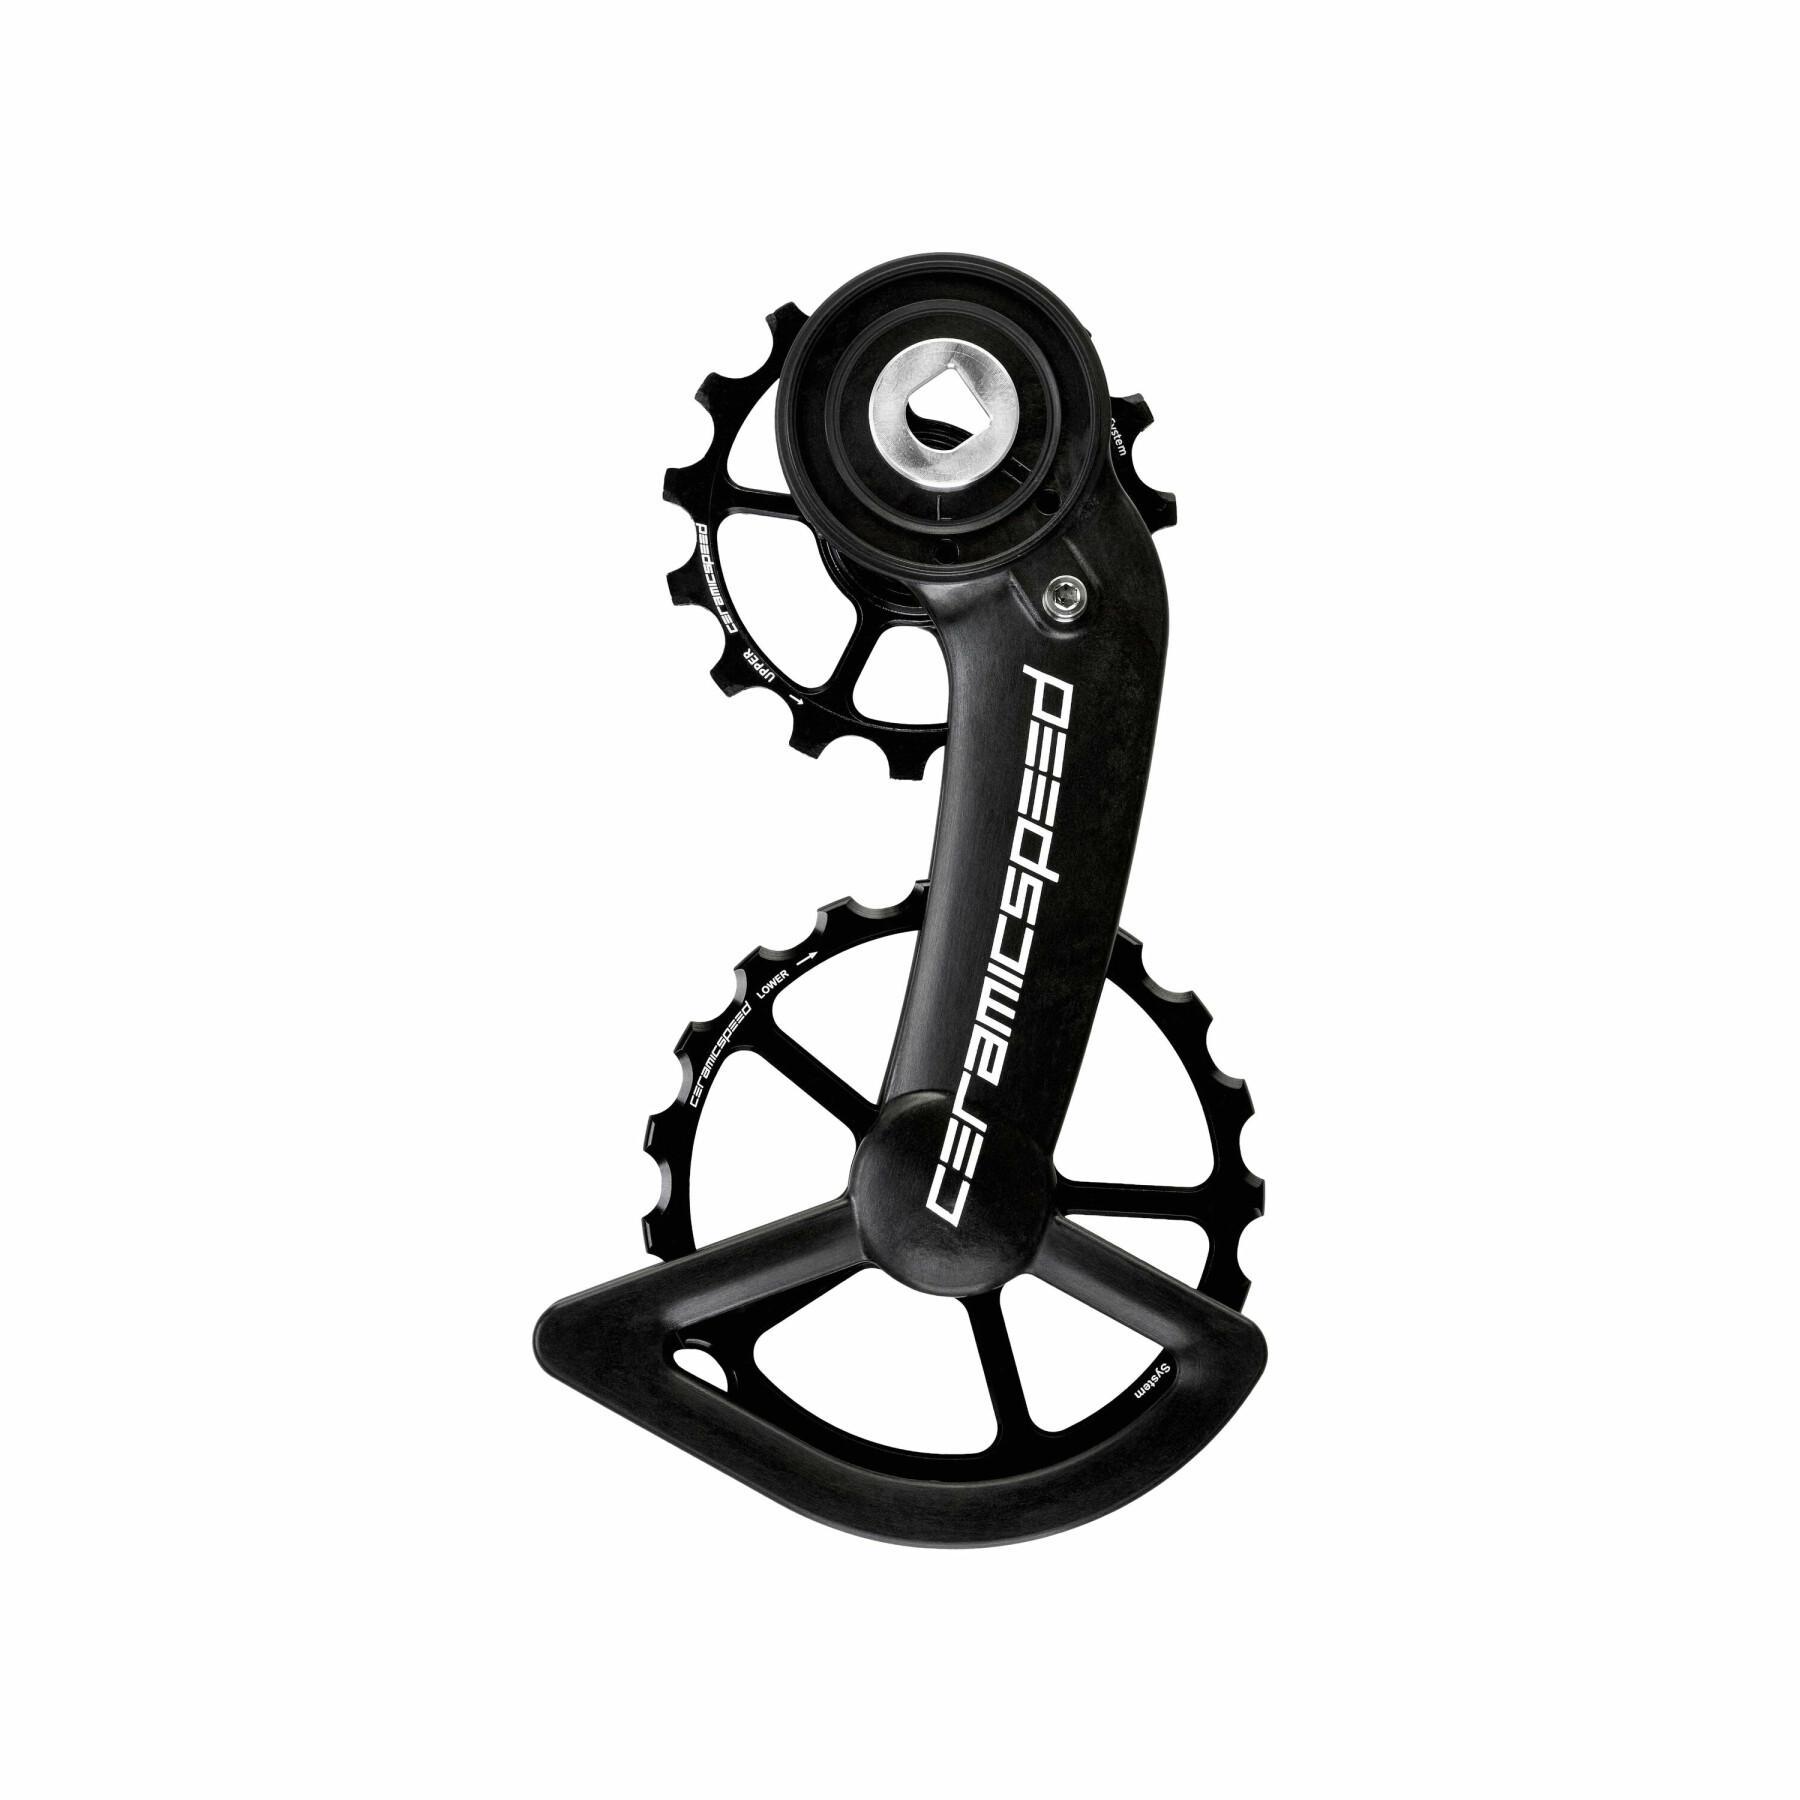 Estrich CeramicSpeed OSPW coated Sram red/force axs